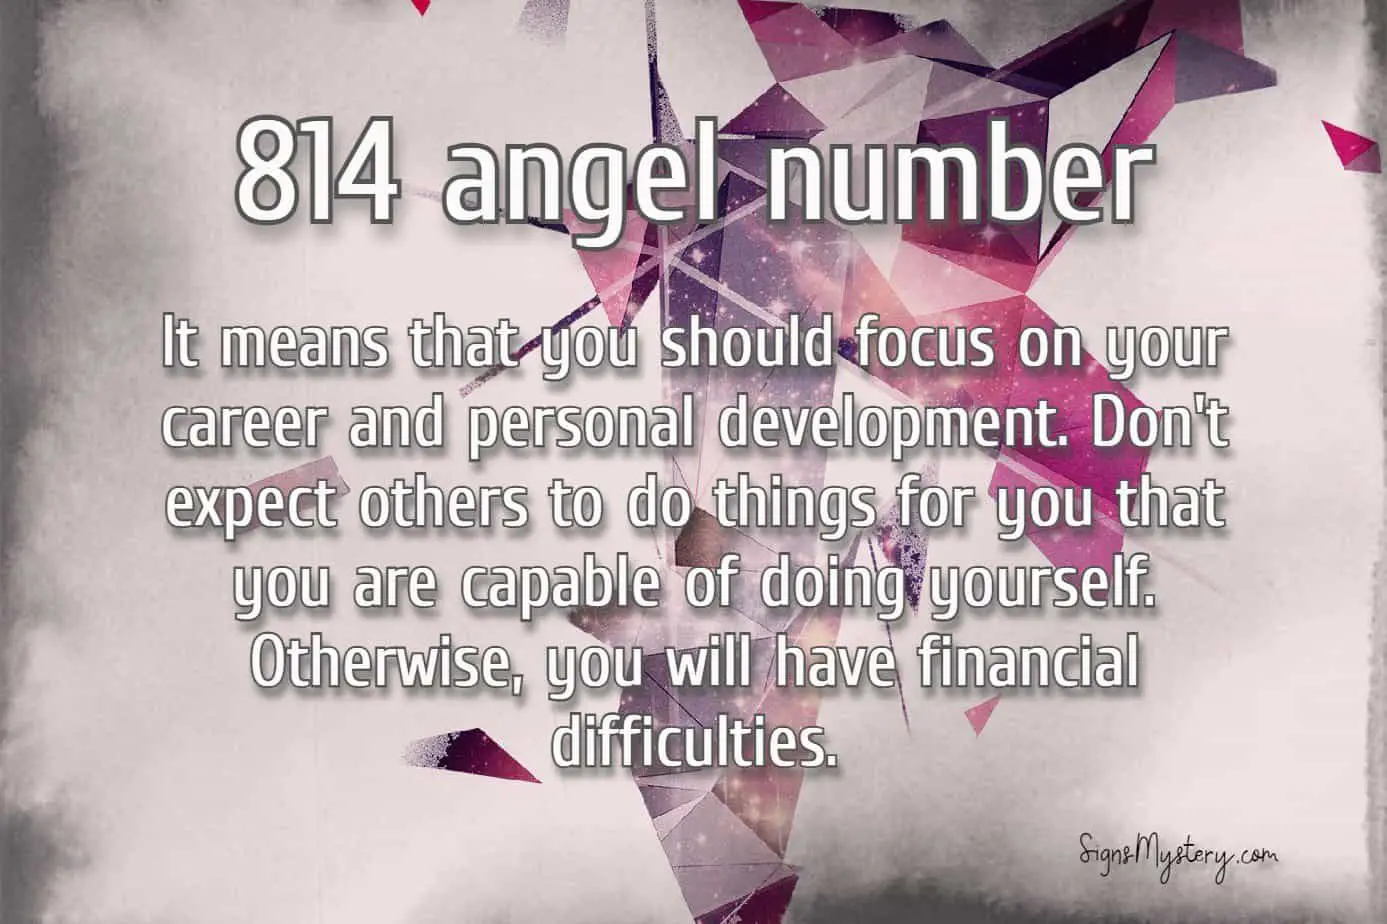 814 angel number meaning